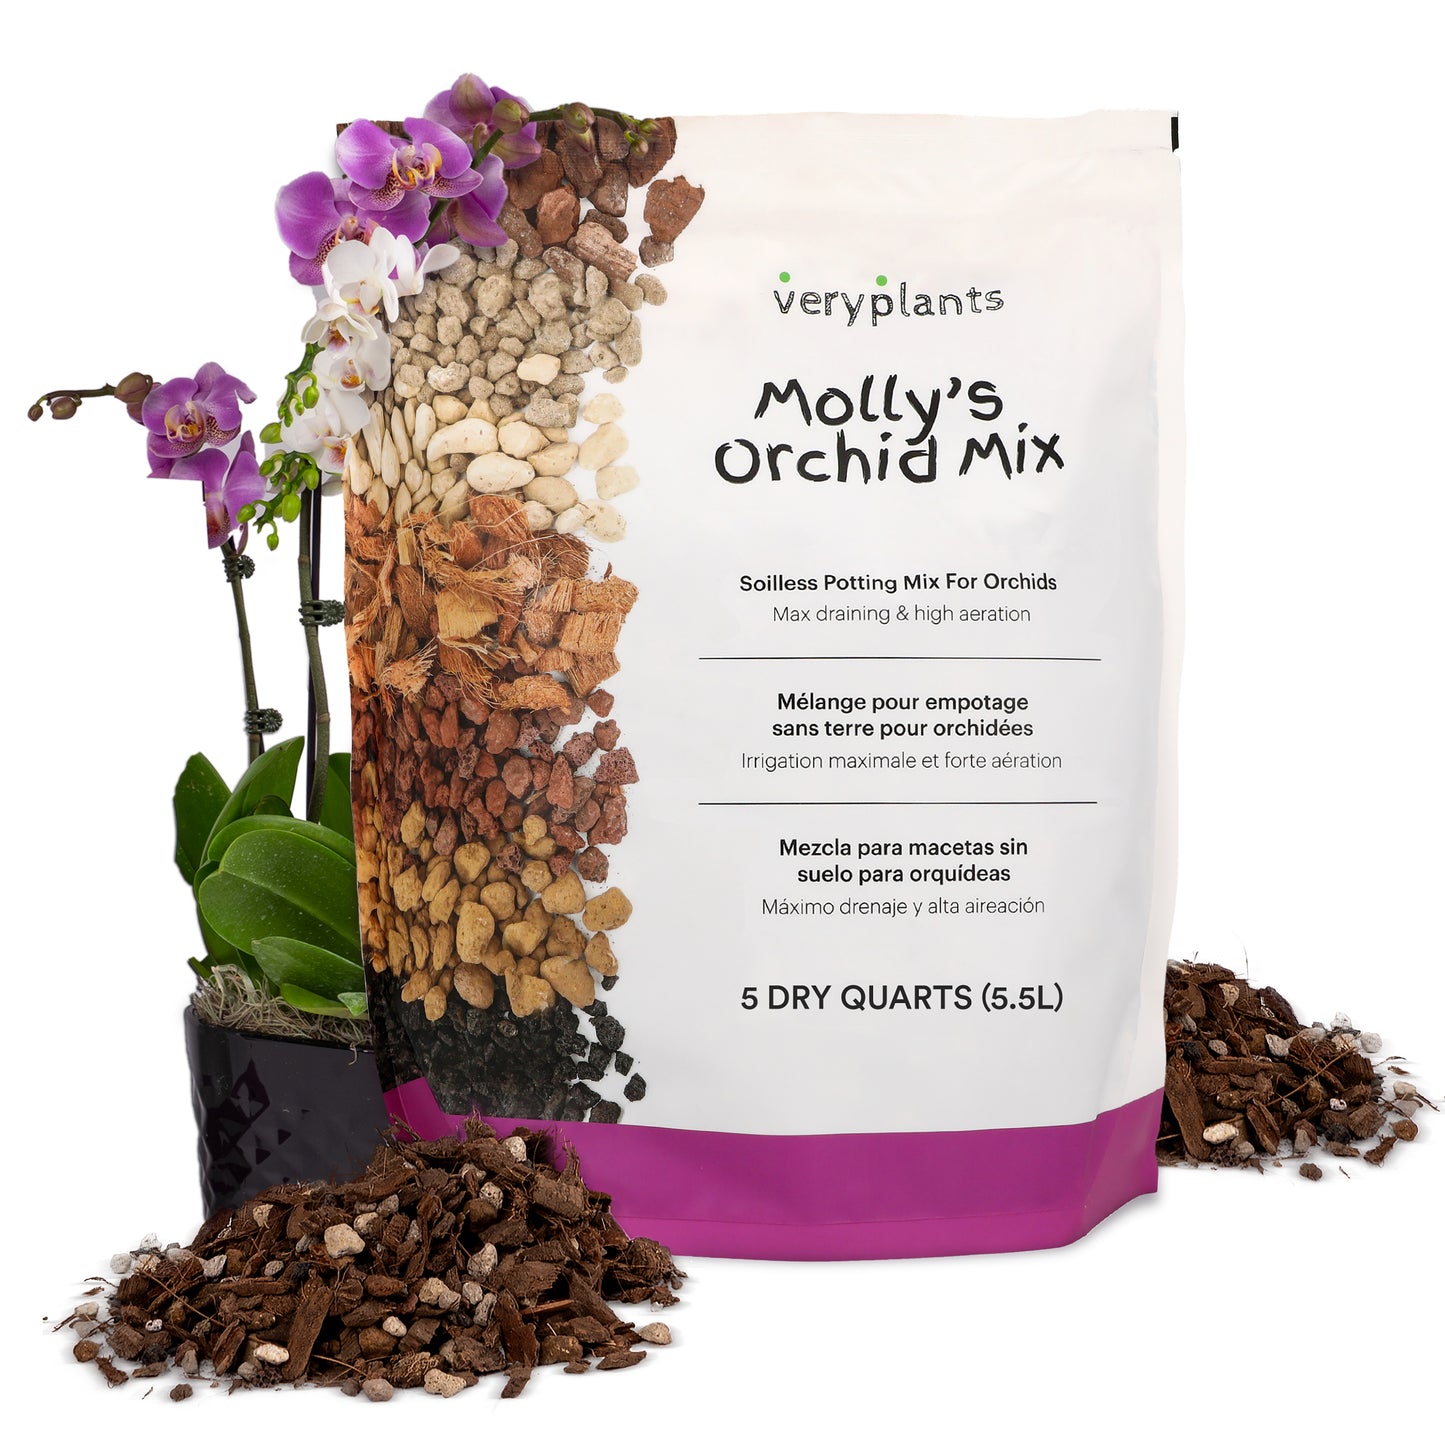 Molly's Orchid Mix - Premium Soilless Orchid Potting Mix